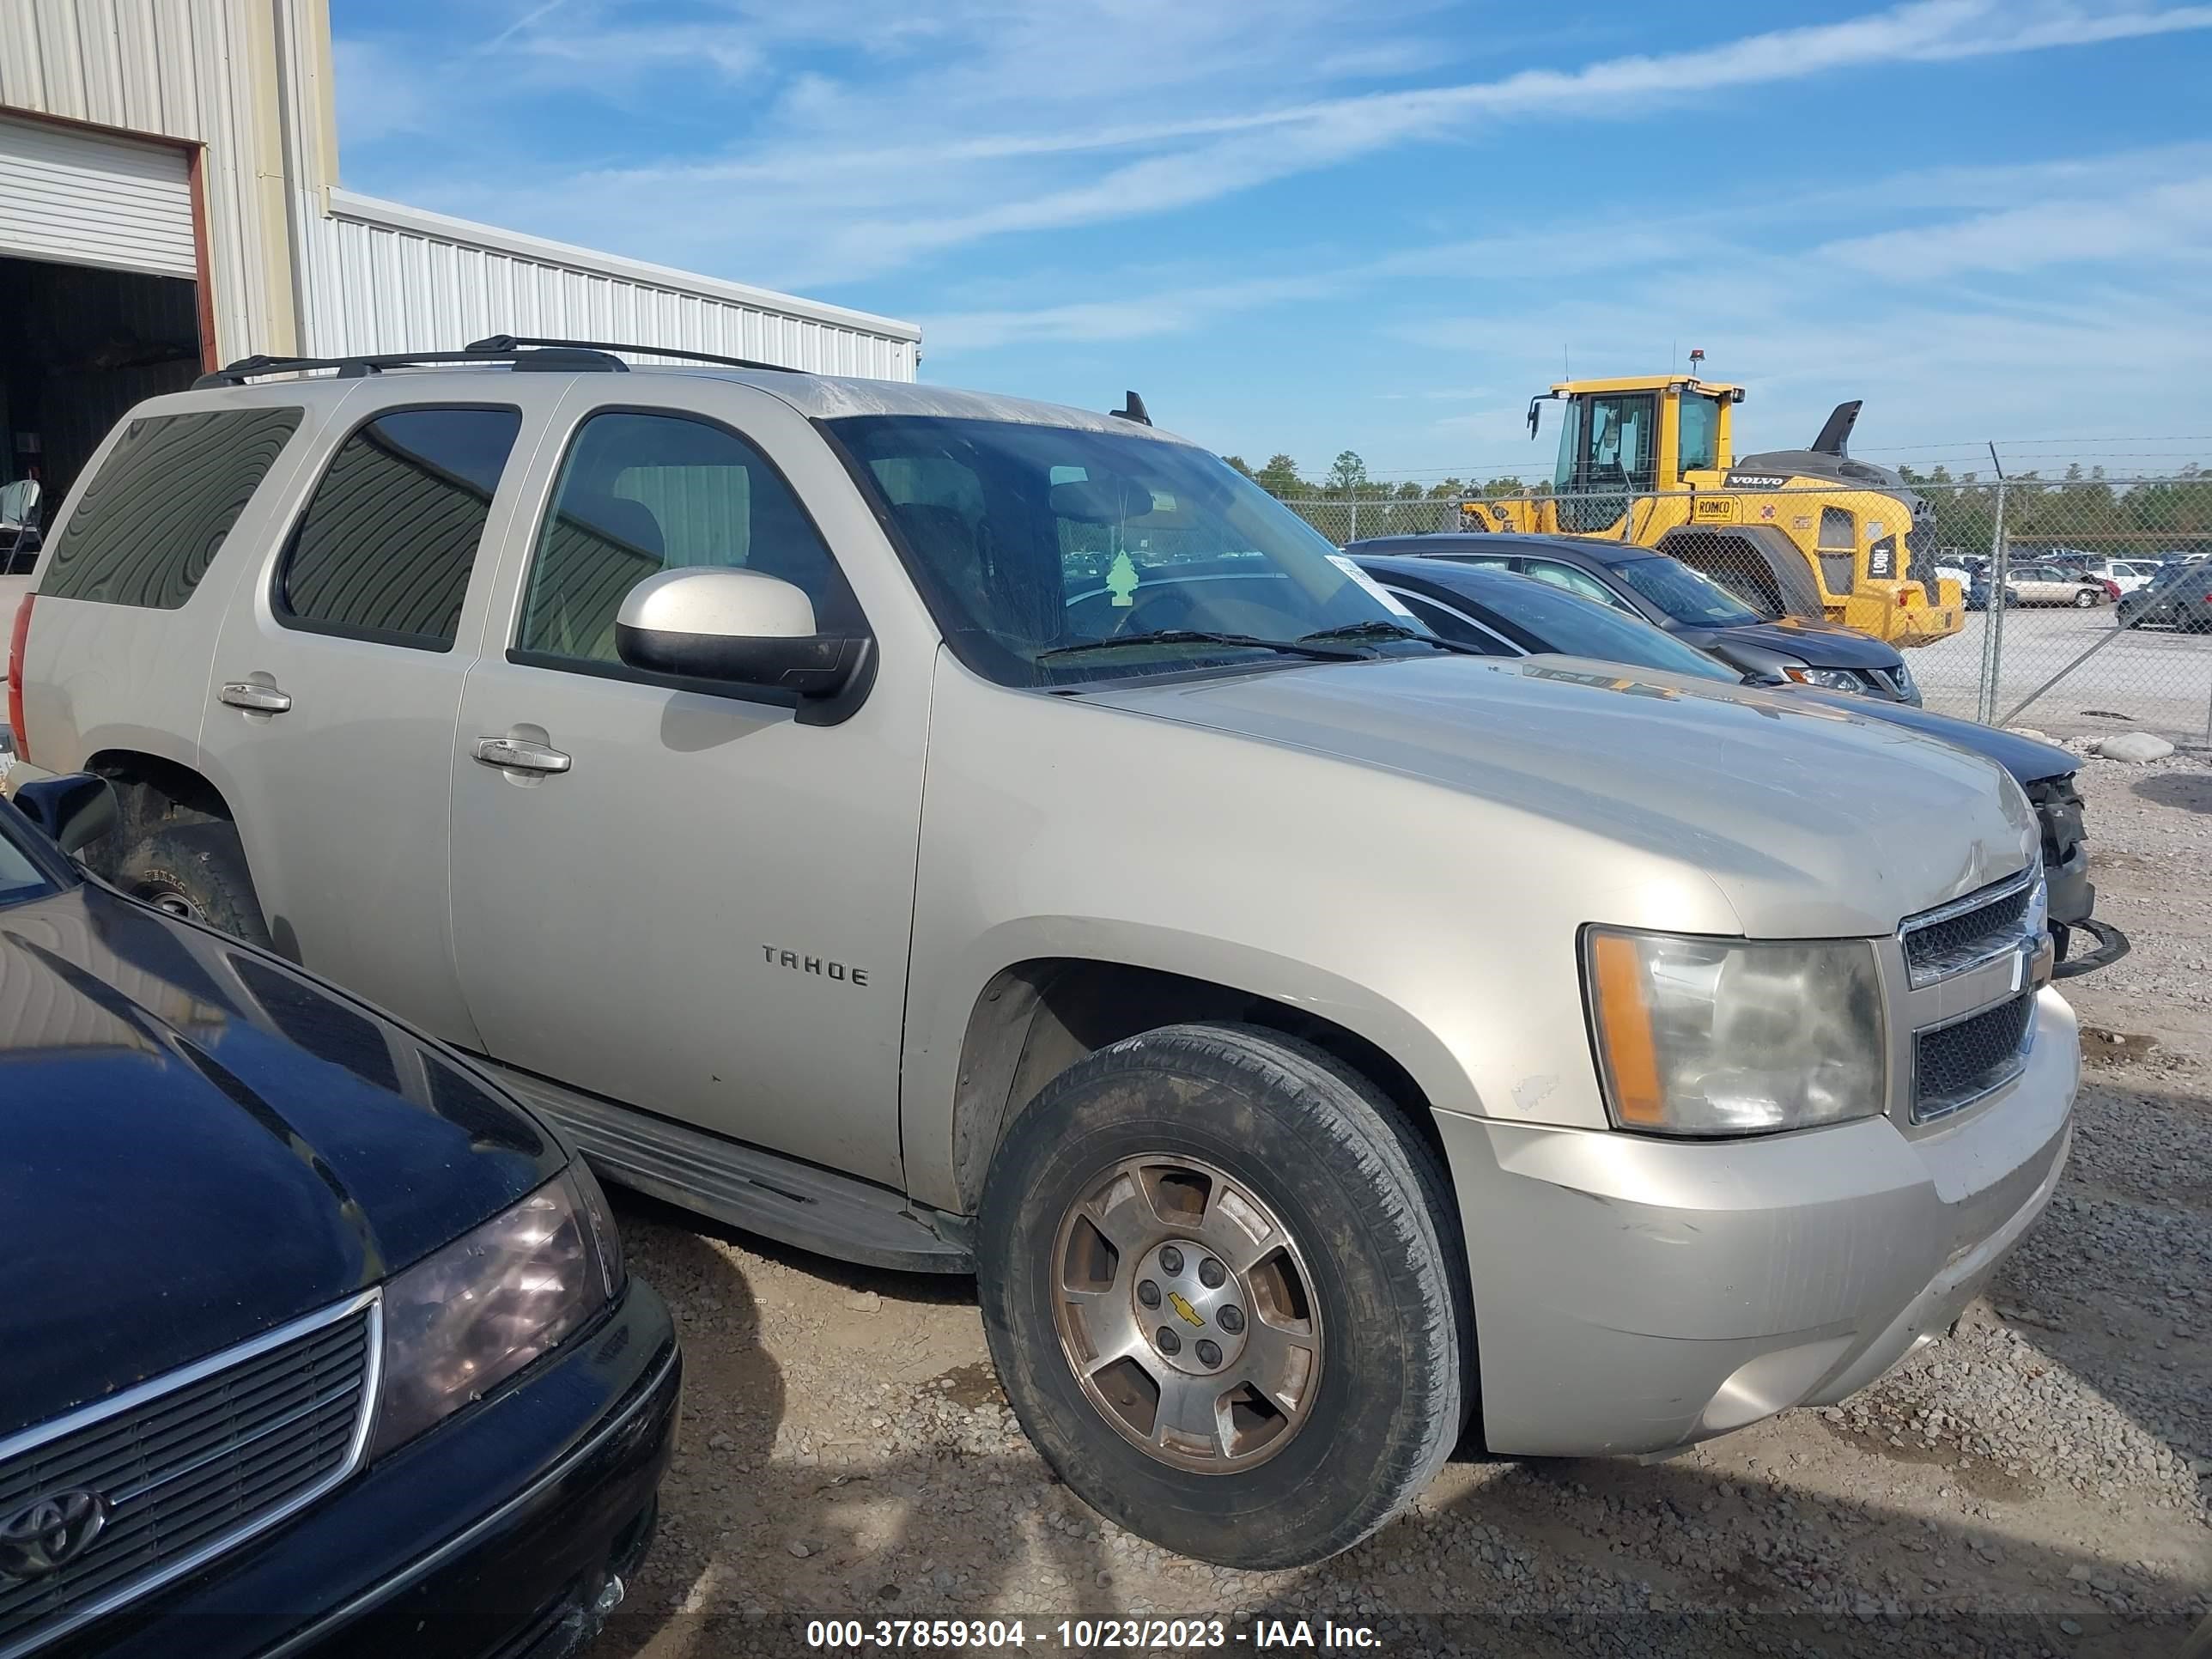 vin: VF7PNCFB489627620 VF7PNCFB489627620 2011 chevrolet tahoe 0 for Sale in 39562, 8209 Old Stage Rd, Moss Point, USA